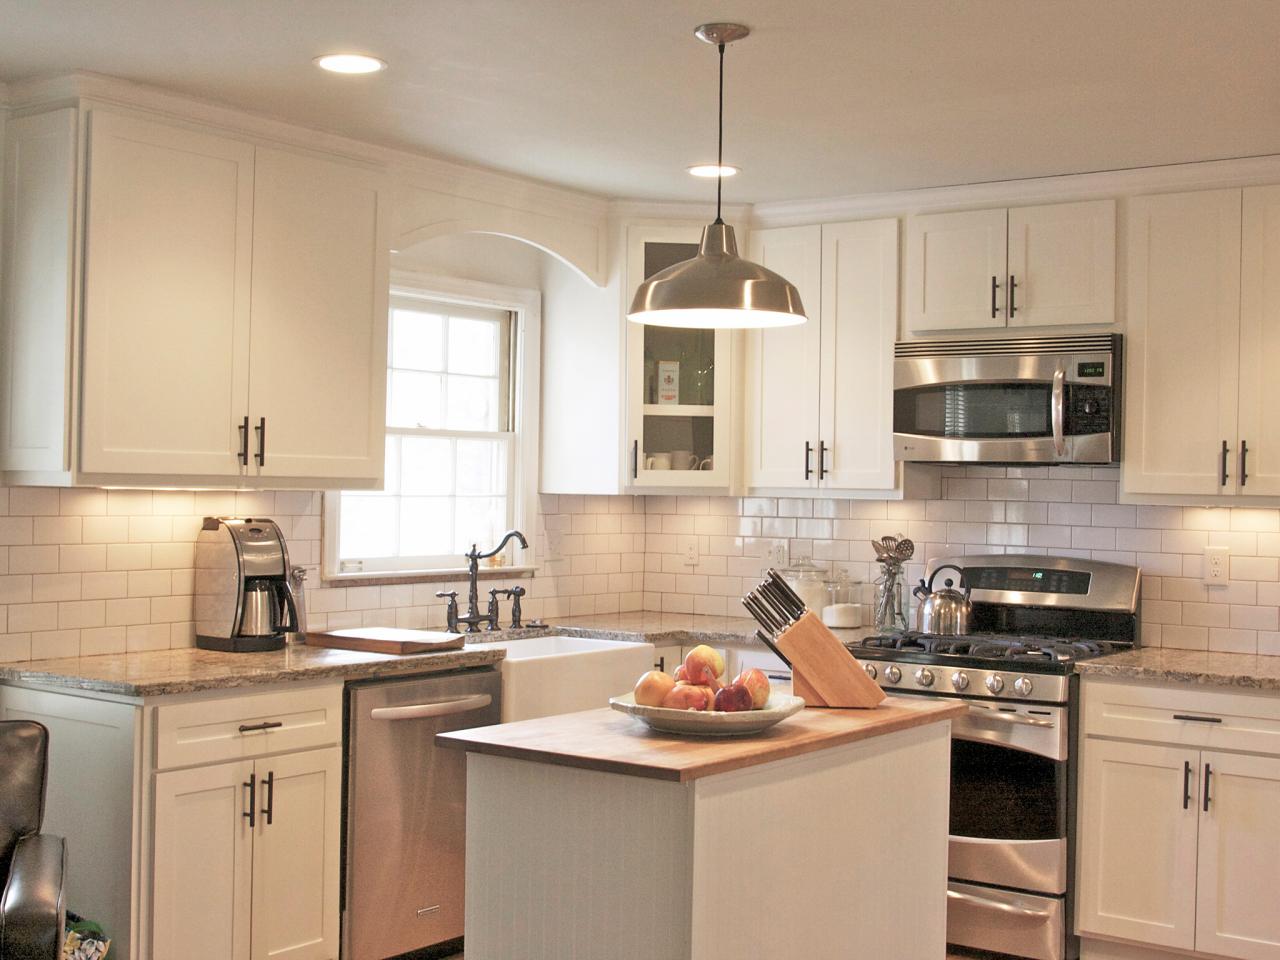 Shaker Kitchen Cabinets: Pictures, Options, Tips & Ideas ...
